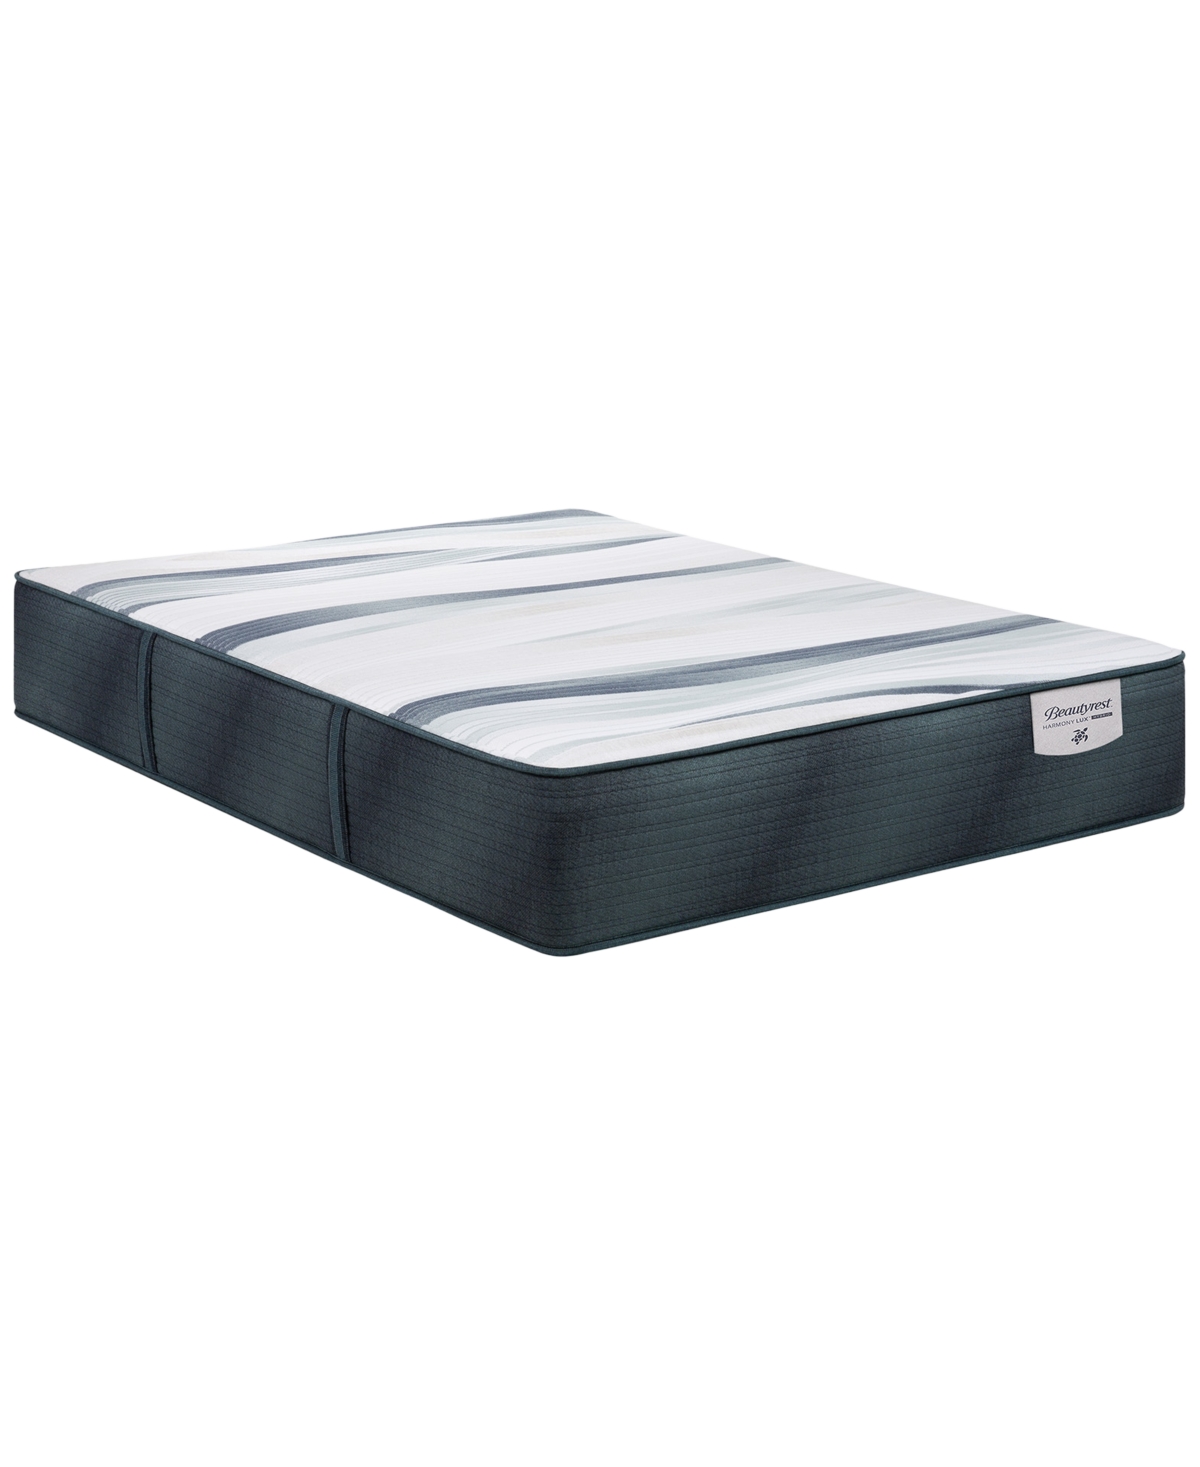 Beautyrest Harmony Lux Hybrid Seabrook Island 13" Firm Mattress-king In No Color